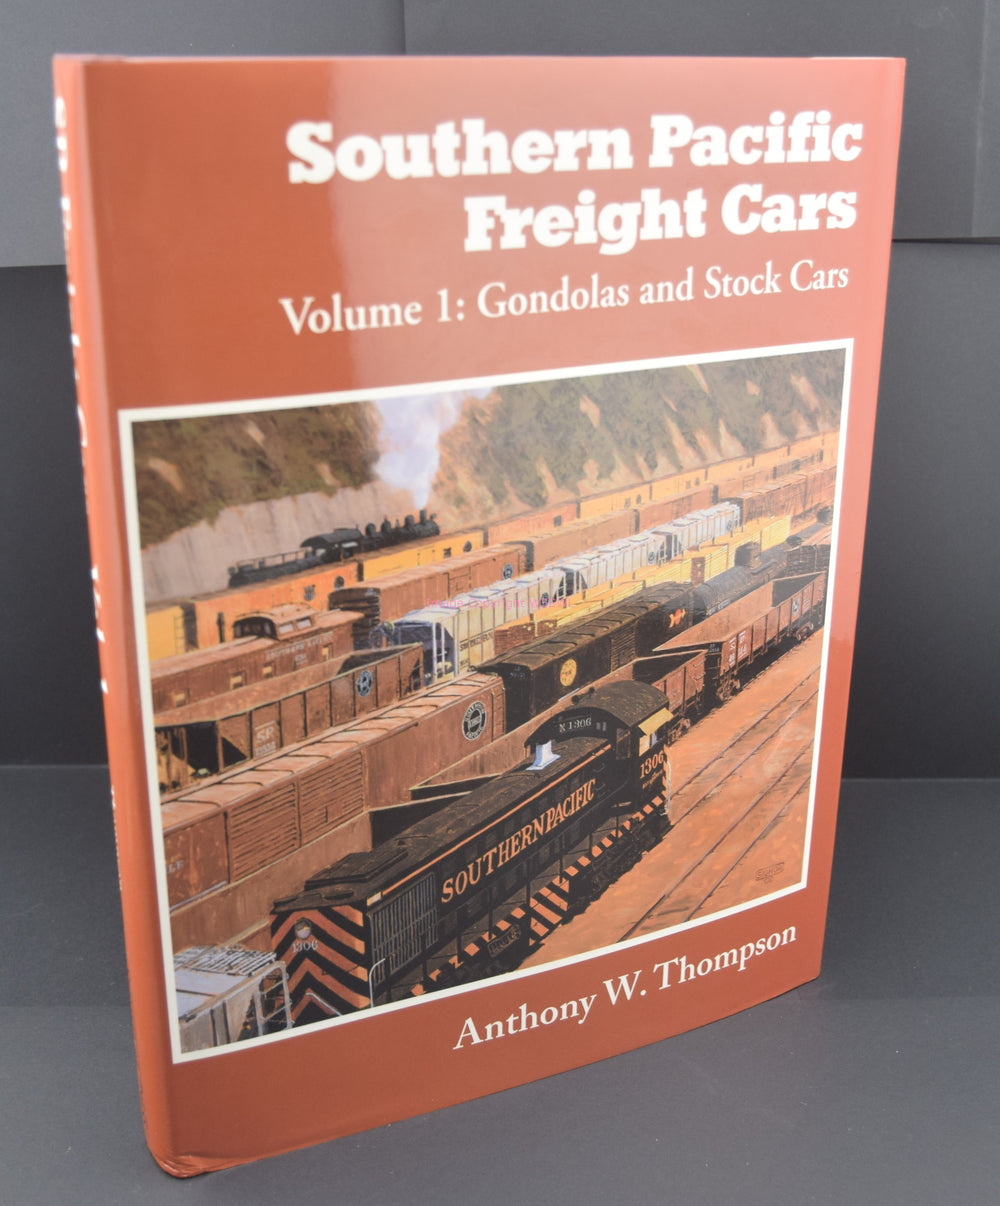 Southern Pacific Freight Cars Volume 1 Gondolas and Stock Cars - Dave's Hobby Shop by W5SWL